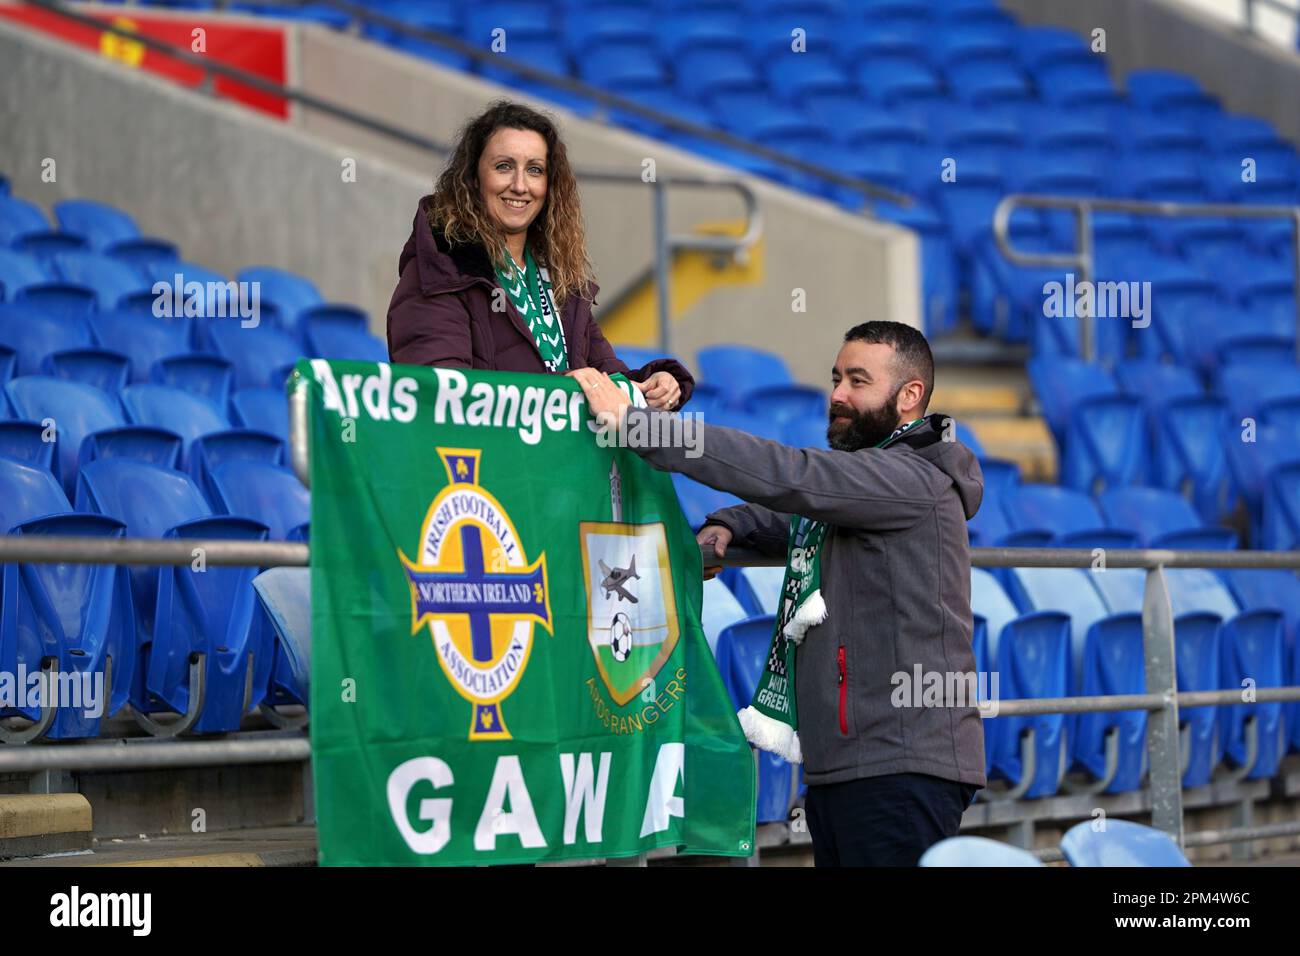 Irish football fans from Ards Rangers fly their flag before Wales 4 v 1 Northern Ireland, Cardiff City Stadium, 6th April 2023 Stock Photo